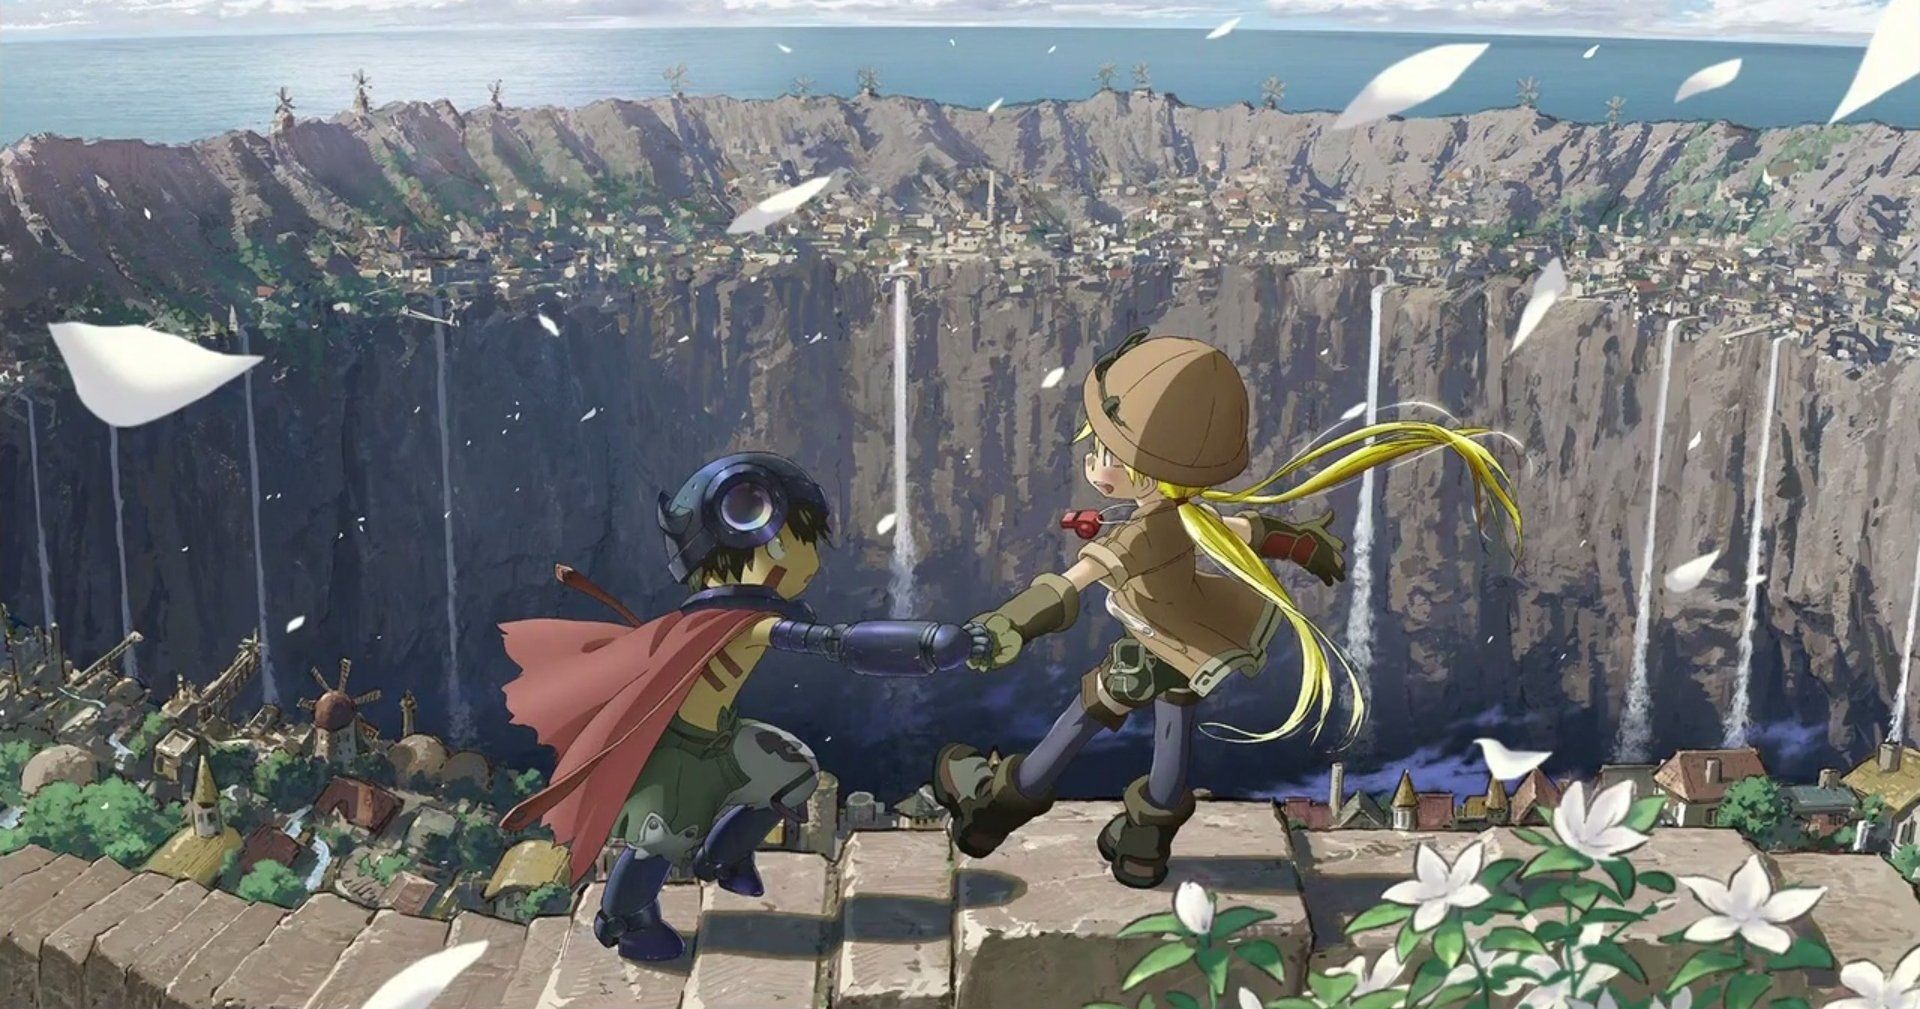 Made in Abyss Season 2 Release Date Announced, Gets Third Trailer